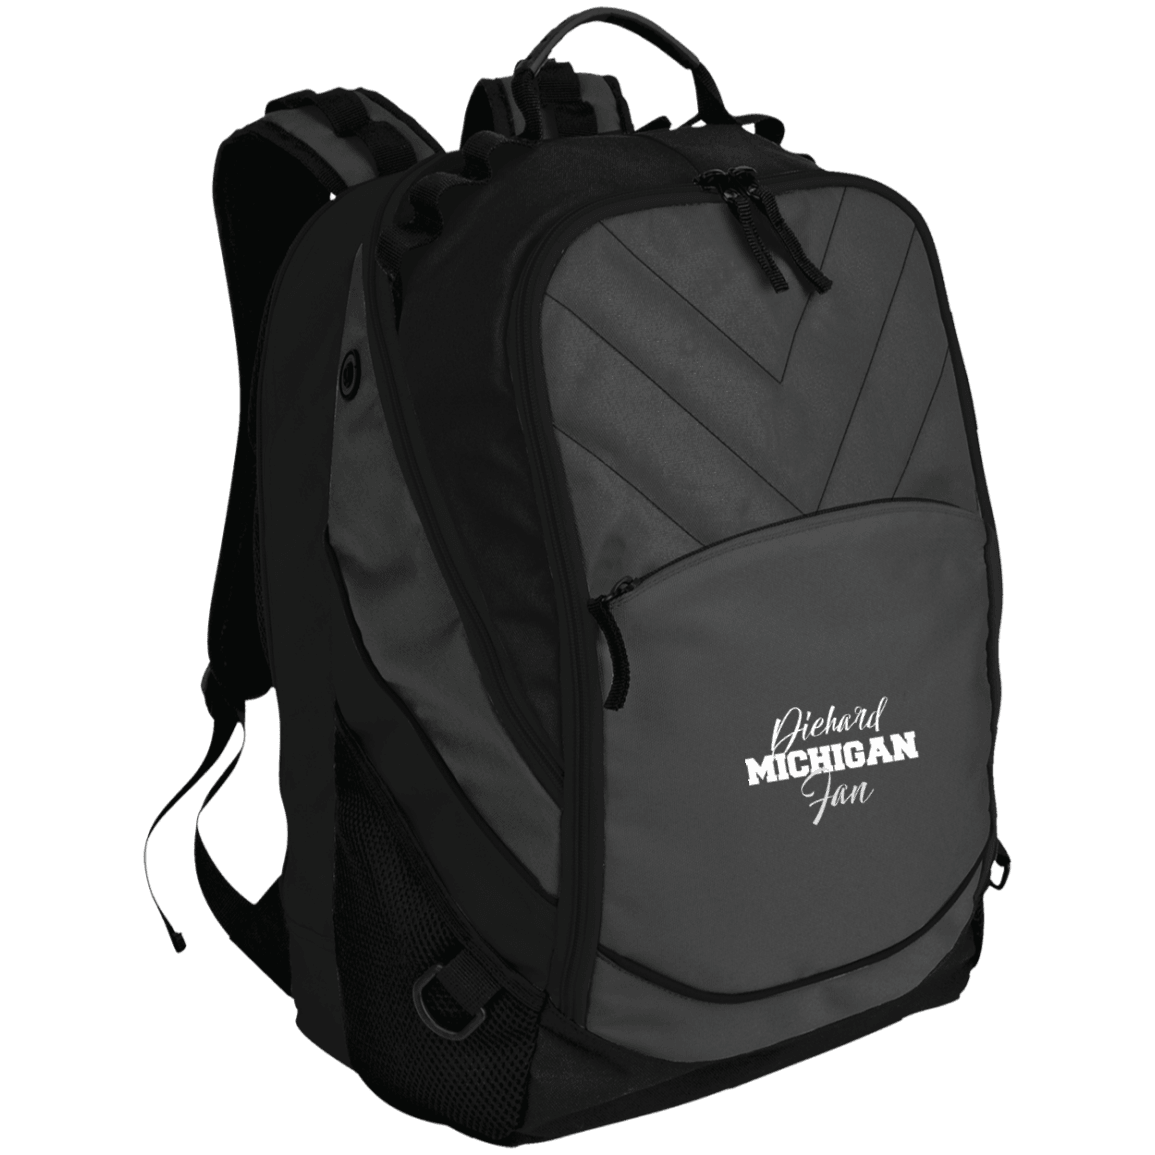 Designs by MyUtopia Shout Out:Diehard Michigan Fan Port Authority Laptop Computer Backpack,Dark Charcoal/Black / One Size,Backpacks